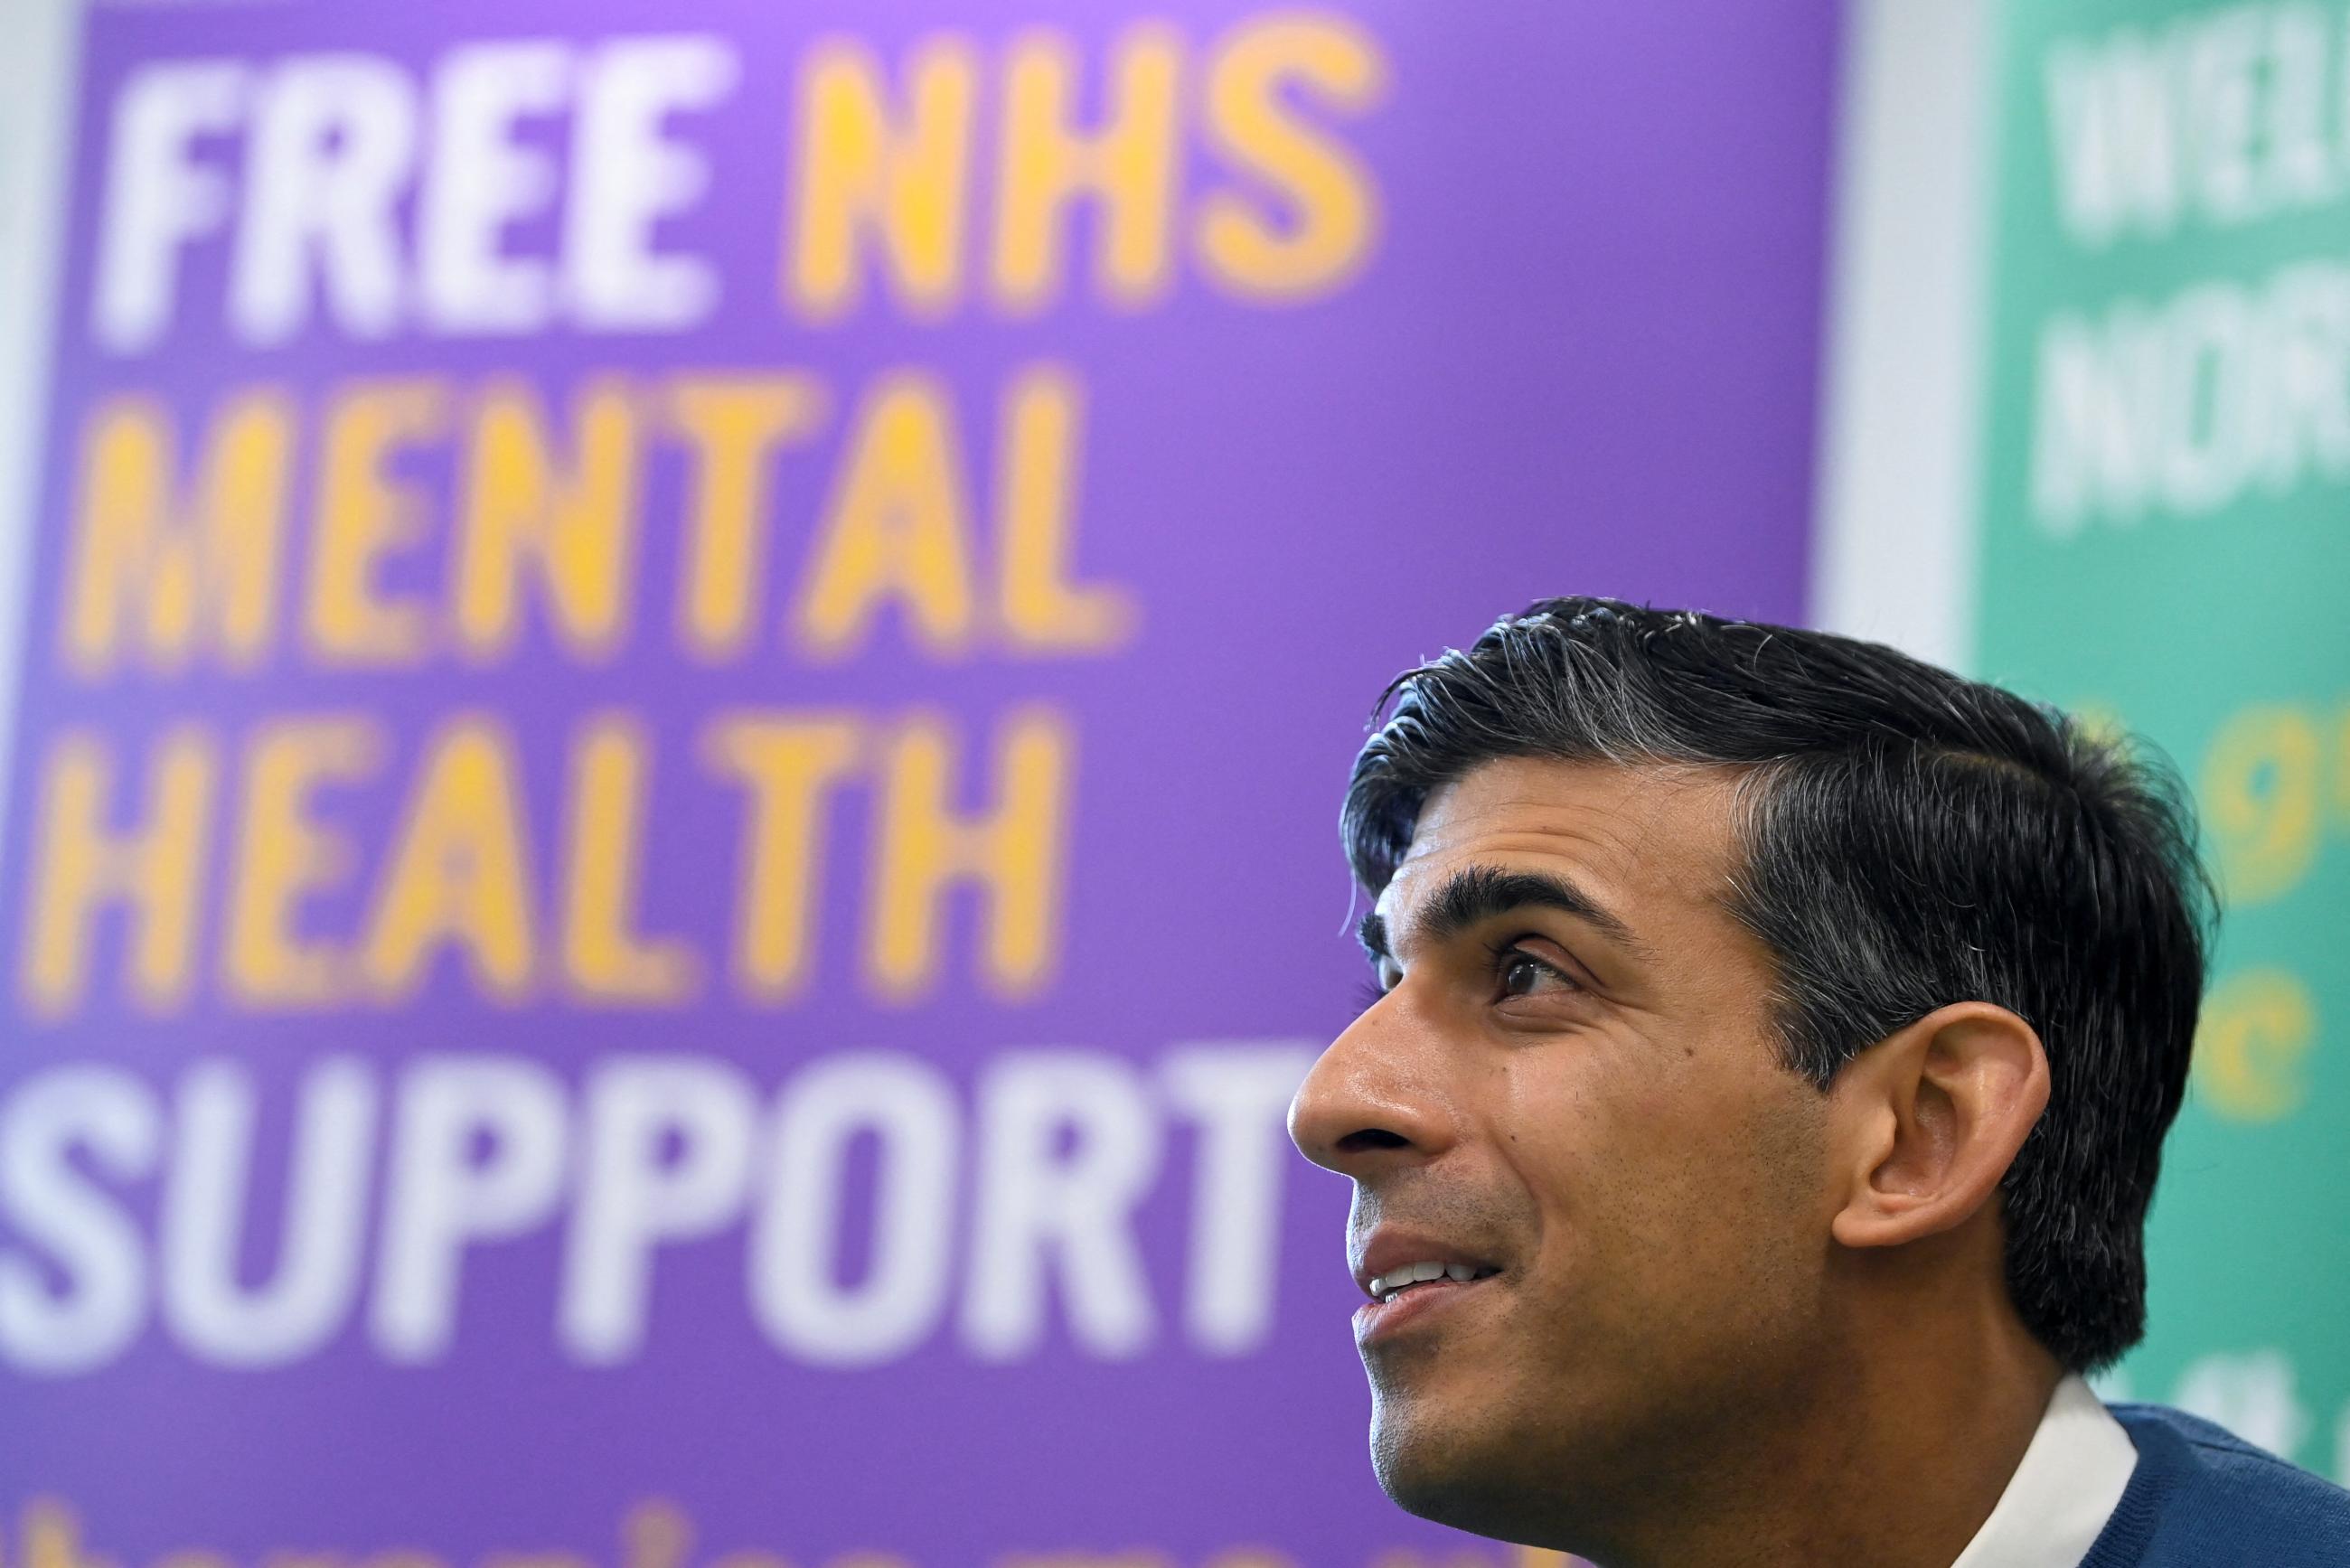 British Prime Minister Rishi Sunak attends a meeting on mental health facilities and support under the National Health Service, during his visit to Berrywood Hospital, in Britain, on January 23, 2023.